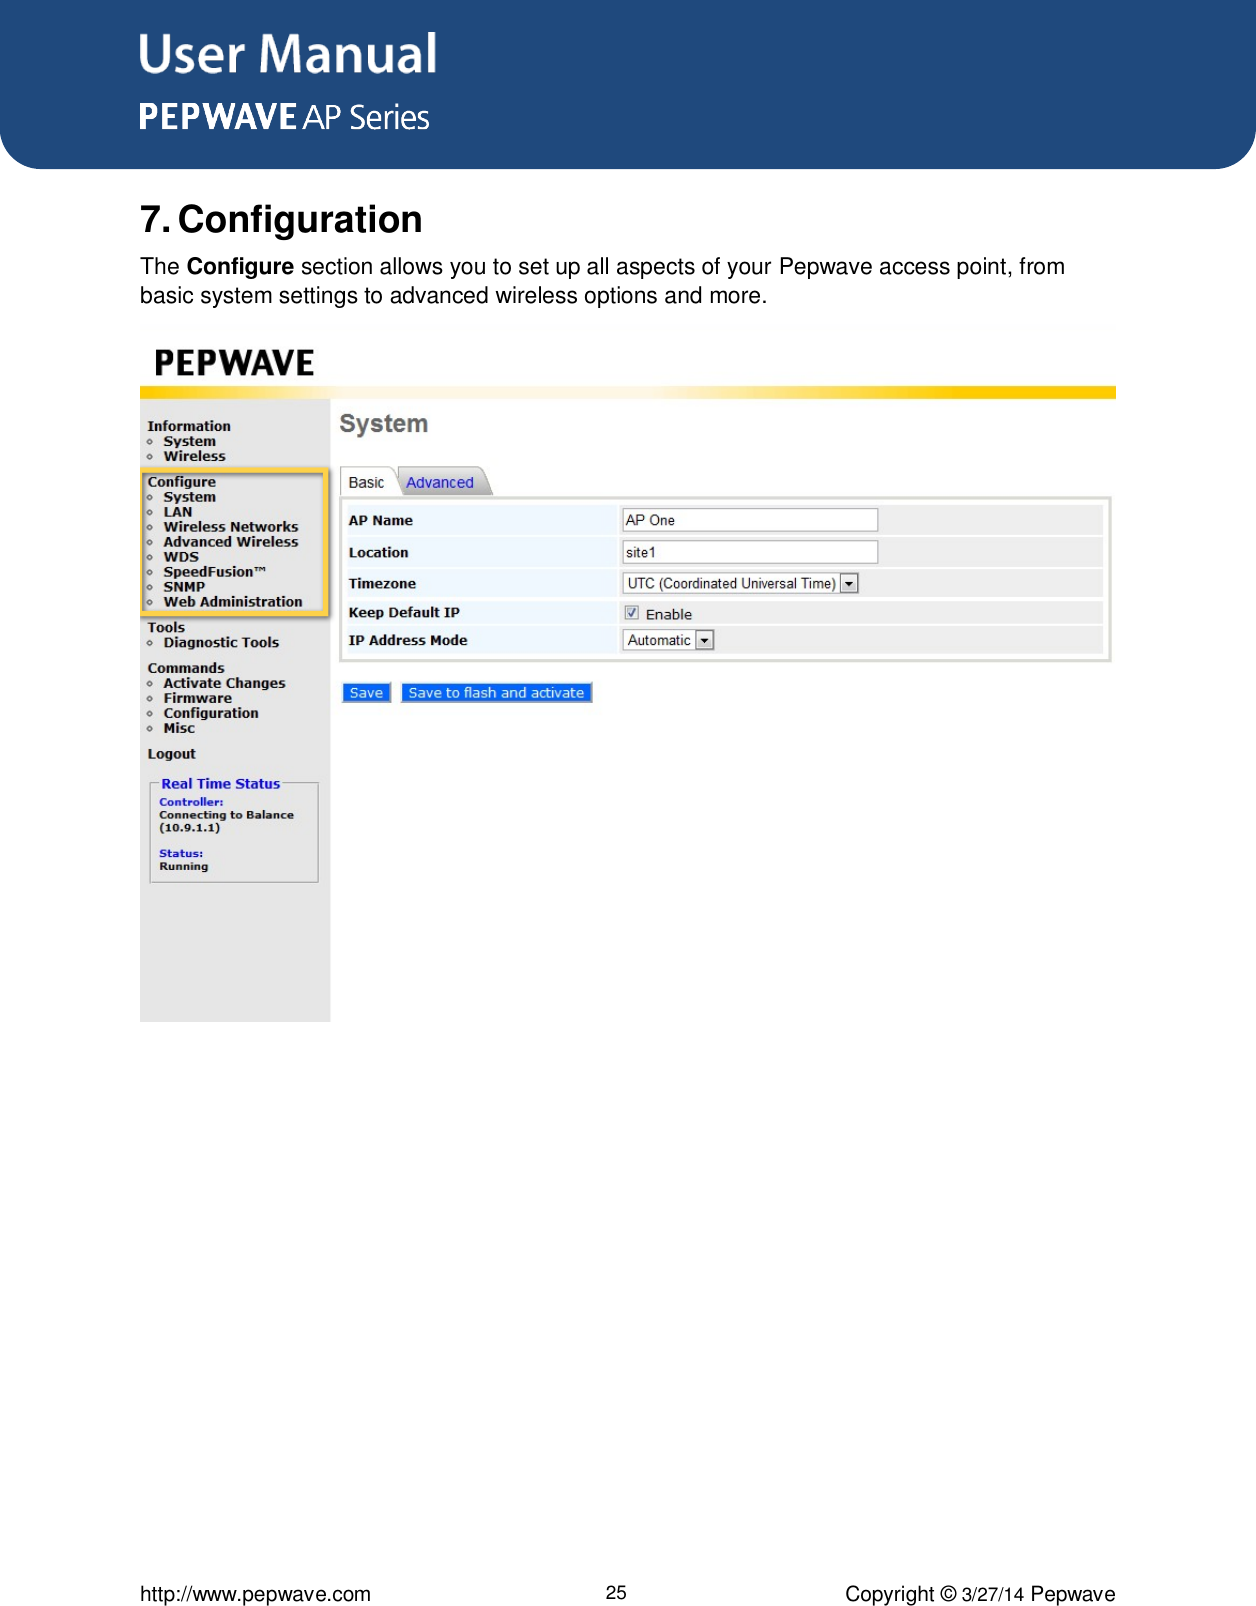 User Manual      http://www.pepwave.com 25 Copyright ©  3/27/14 Pepwave  7. Configuration The Configure section allows you to set up all aspects of your Pepwave access point, from basic system settings to advanced wireless options and more. 